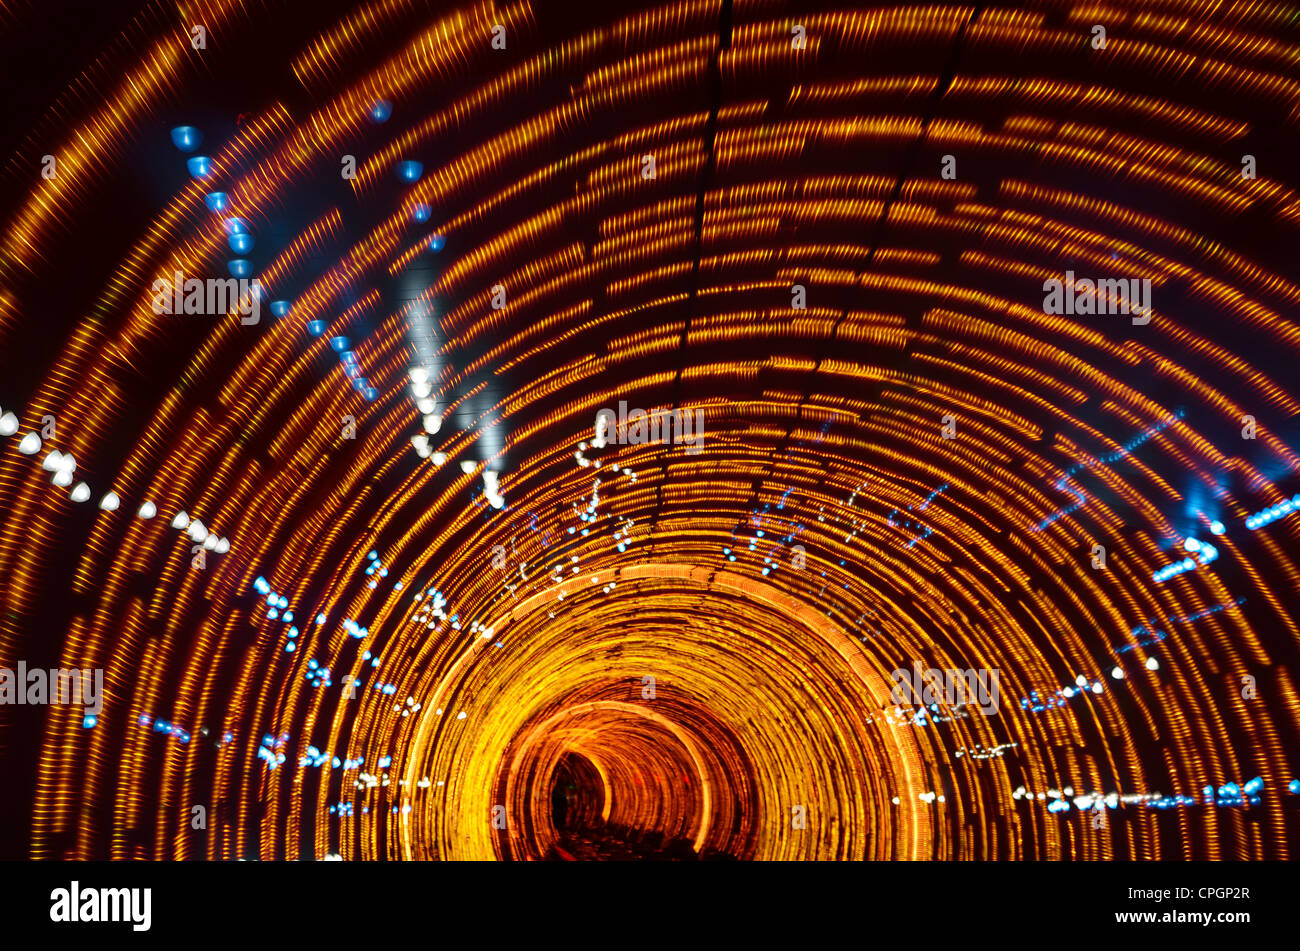 Psychedelic orange lights in the Bund Sightseeing Tunnel under the Huangpu River Shanghai China Stock Photo